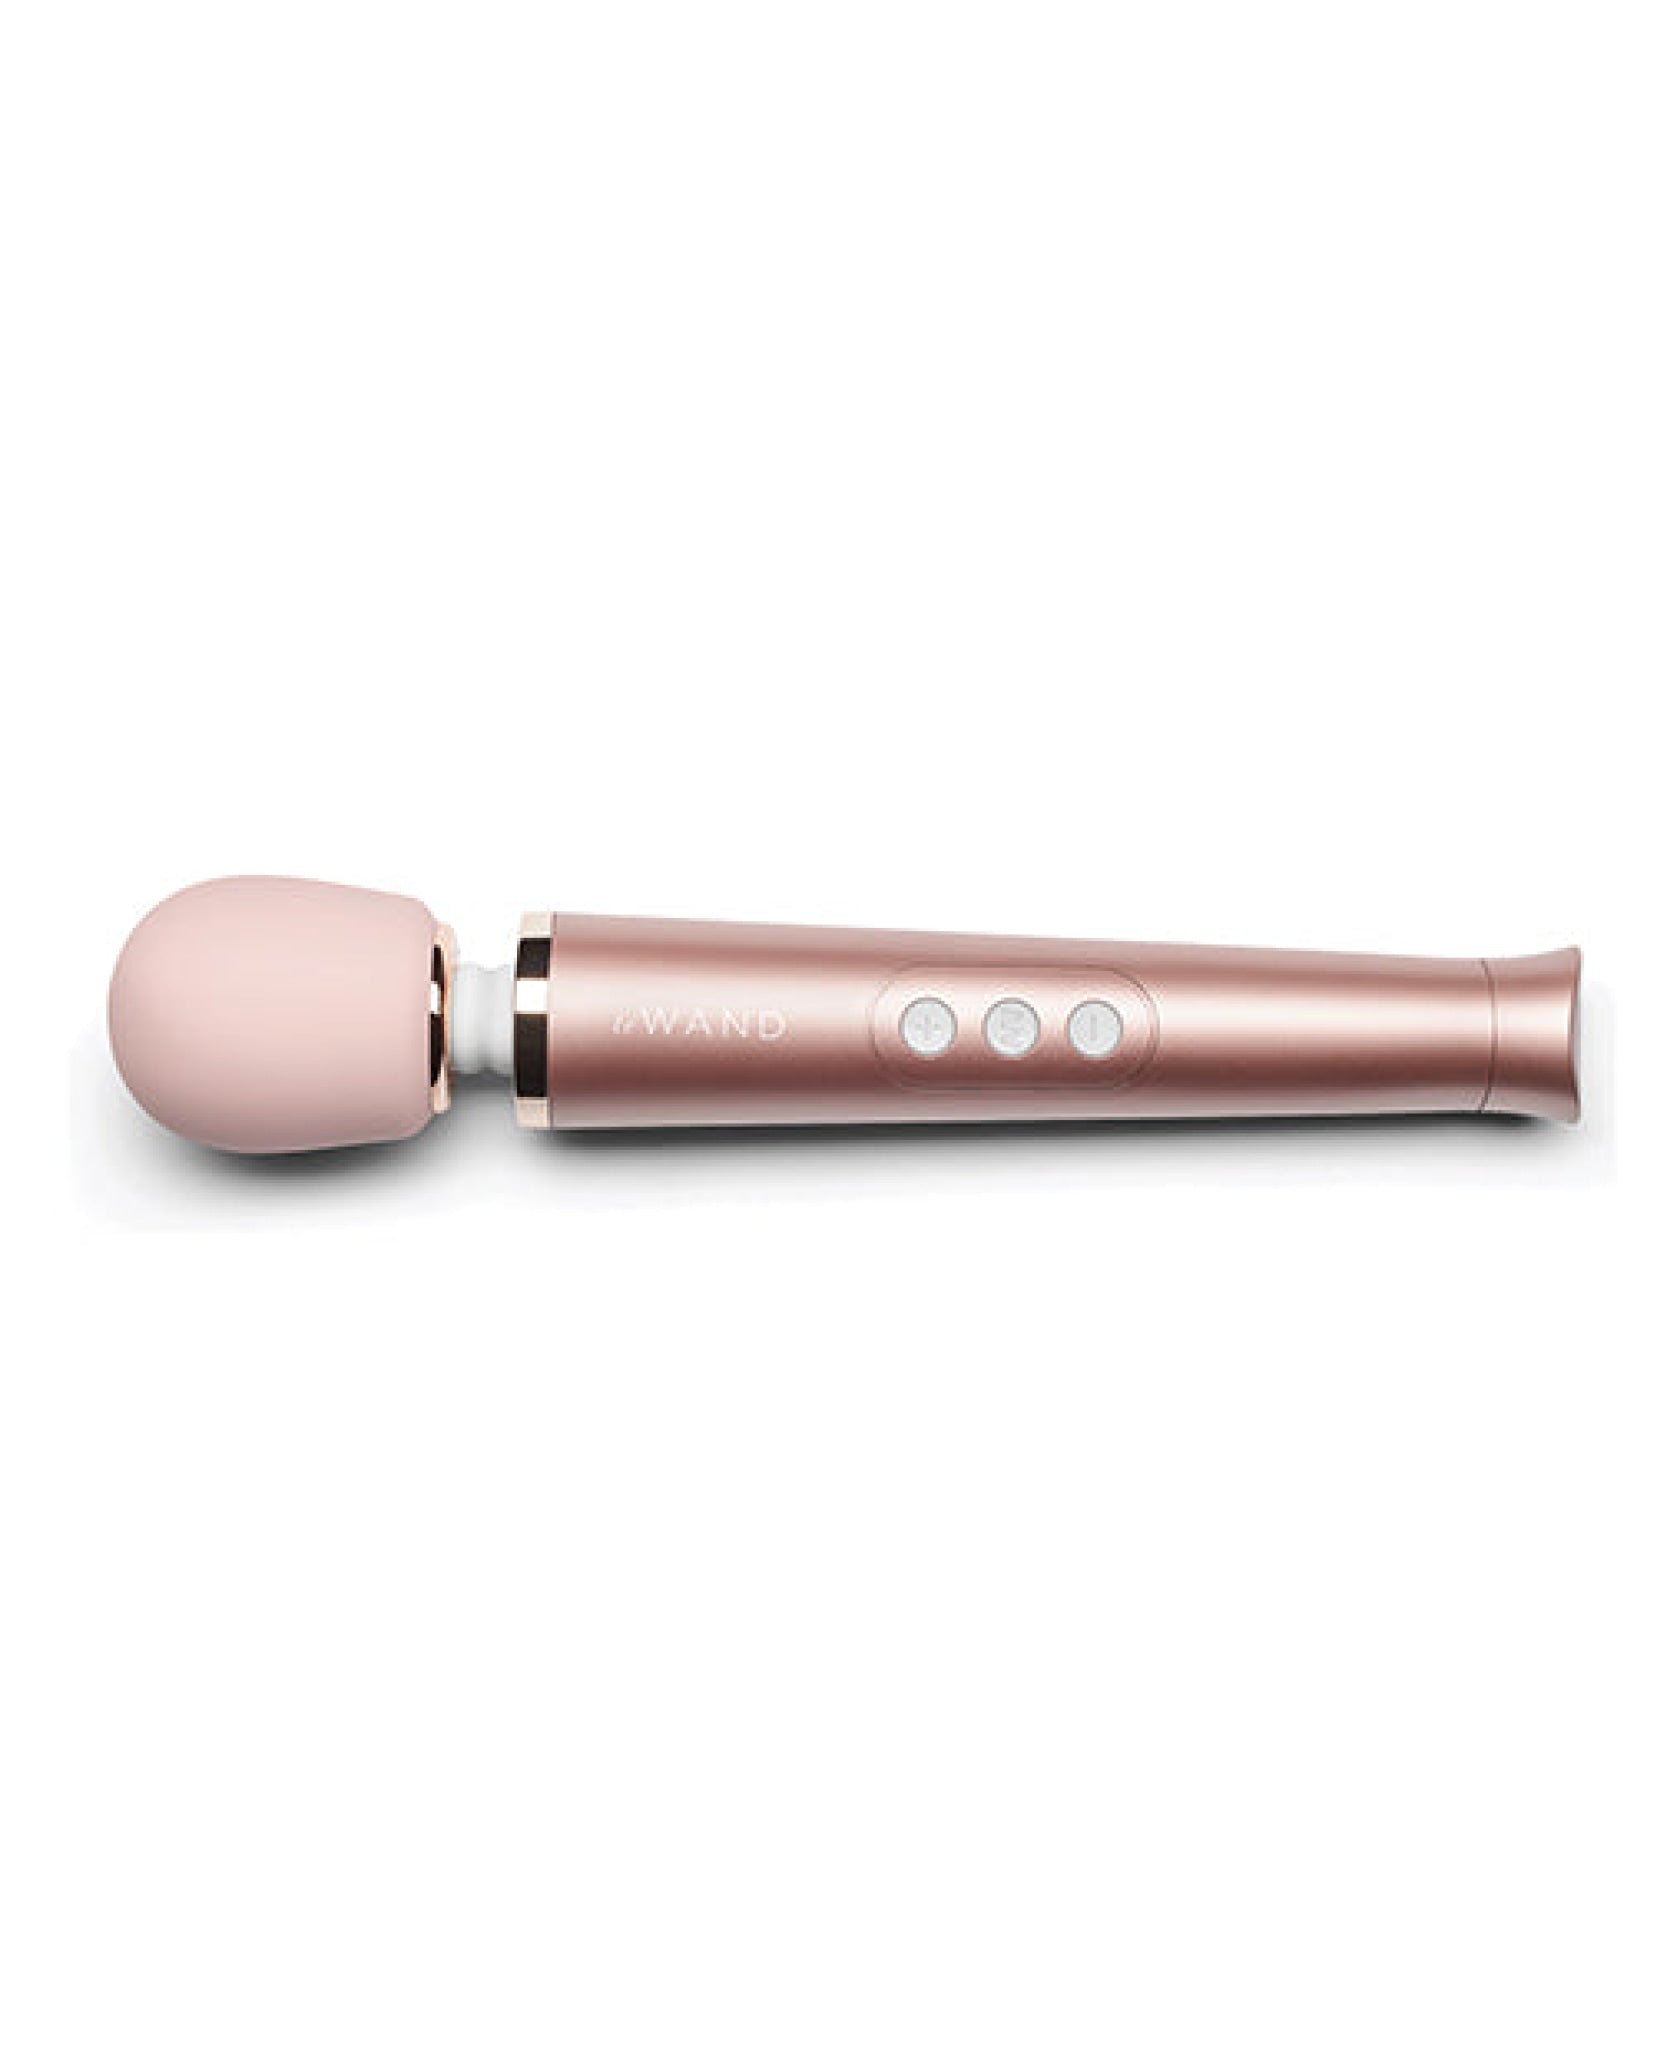 Le Wand Petite Rechargeable Vibrating Massager - Rose Gold Le Wand